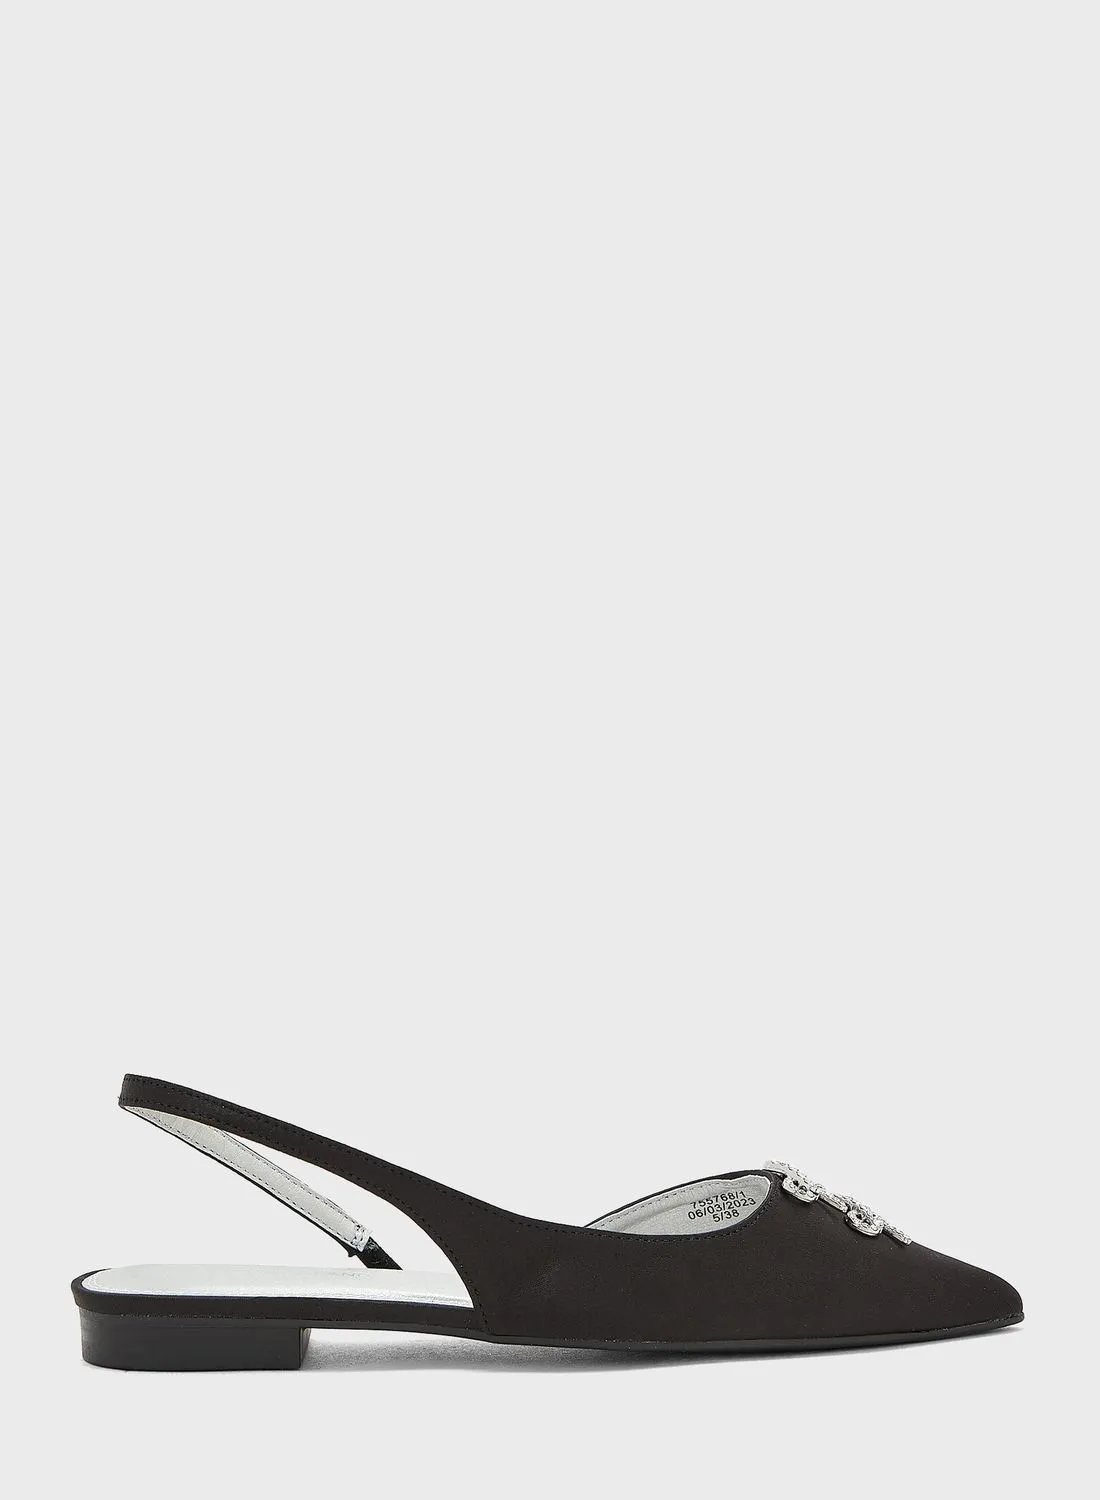 RIVER ISLAND Double Bow Pointed Slingback Sandals